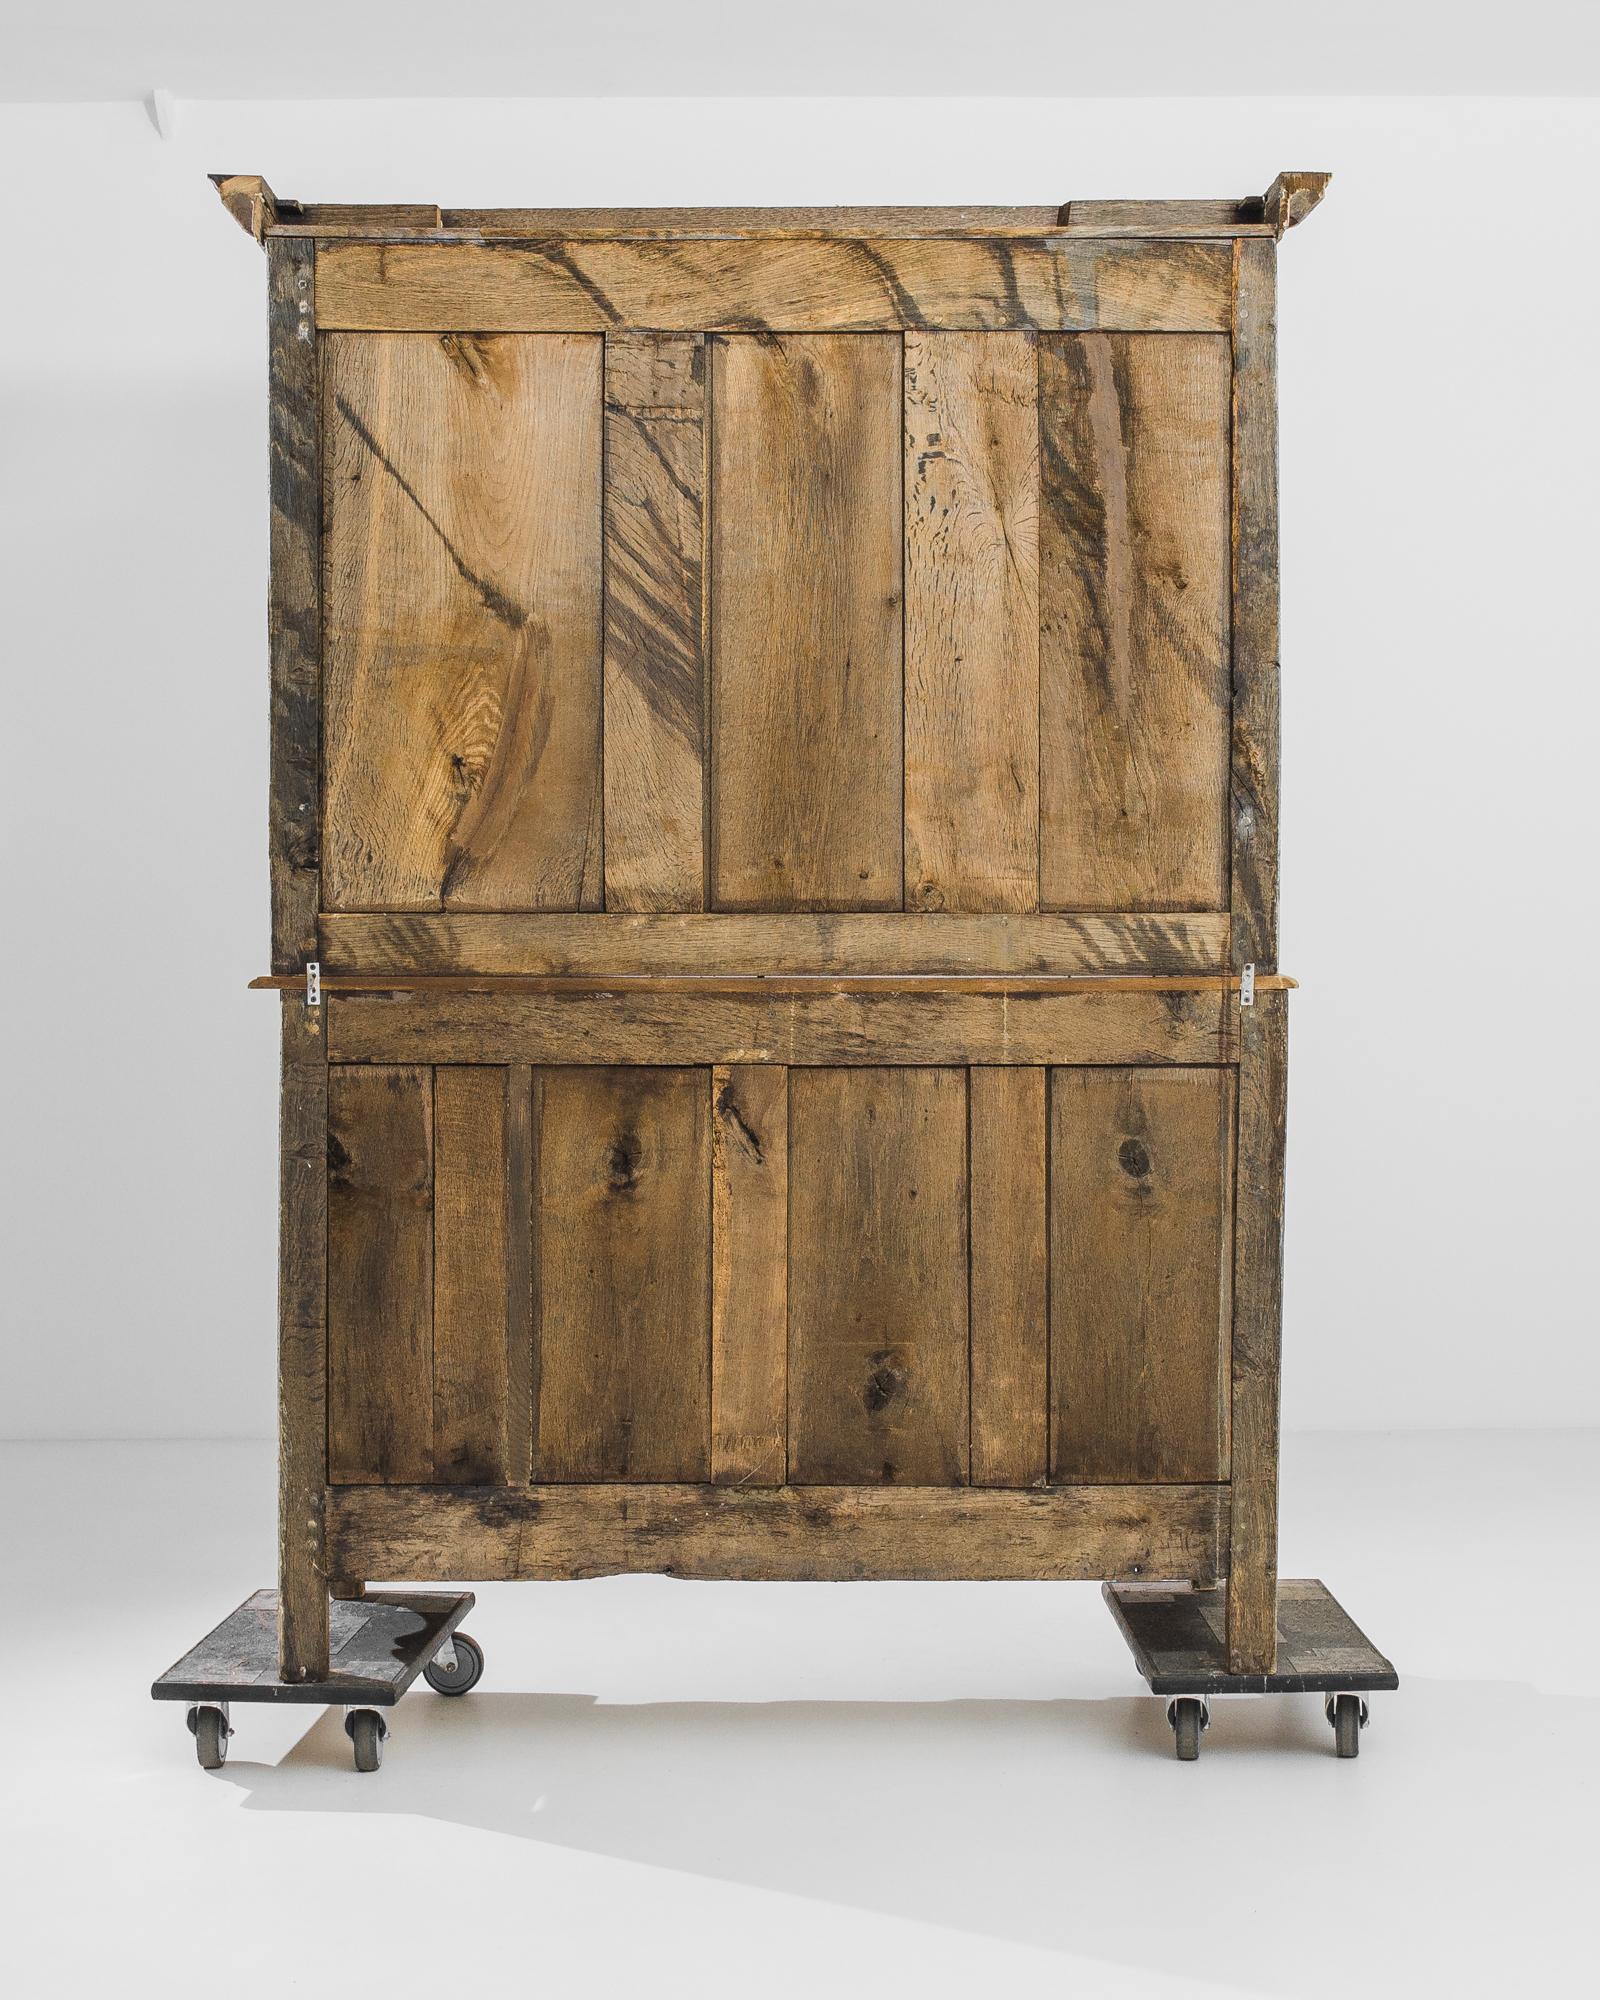 A bleached oak cupboard from France, produced circa 1820. A gorgeous antique certain to inspire childhood memories of inspecting shelves stuffed with knick-knacks that seem to stretch to the sky. In this rustico-chic iteration of this classic